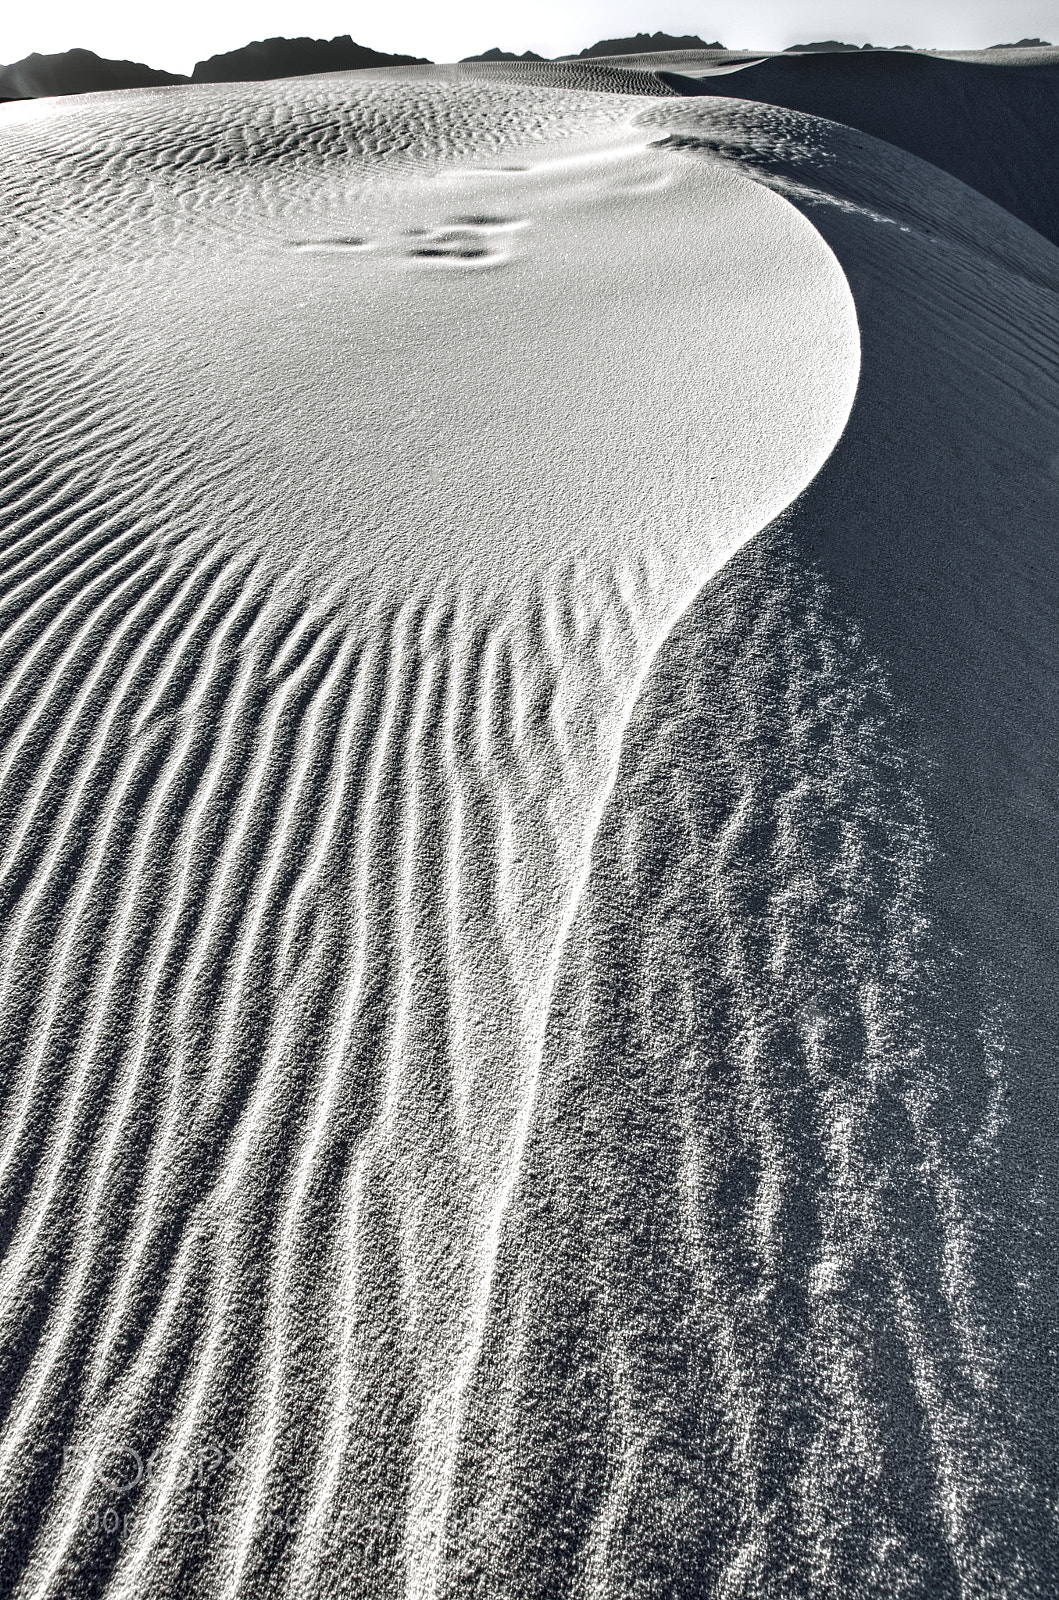 Pentax K-5 sample photo. Whitesands question photography